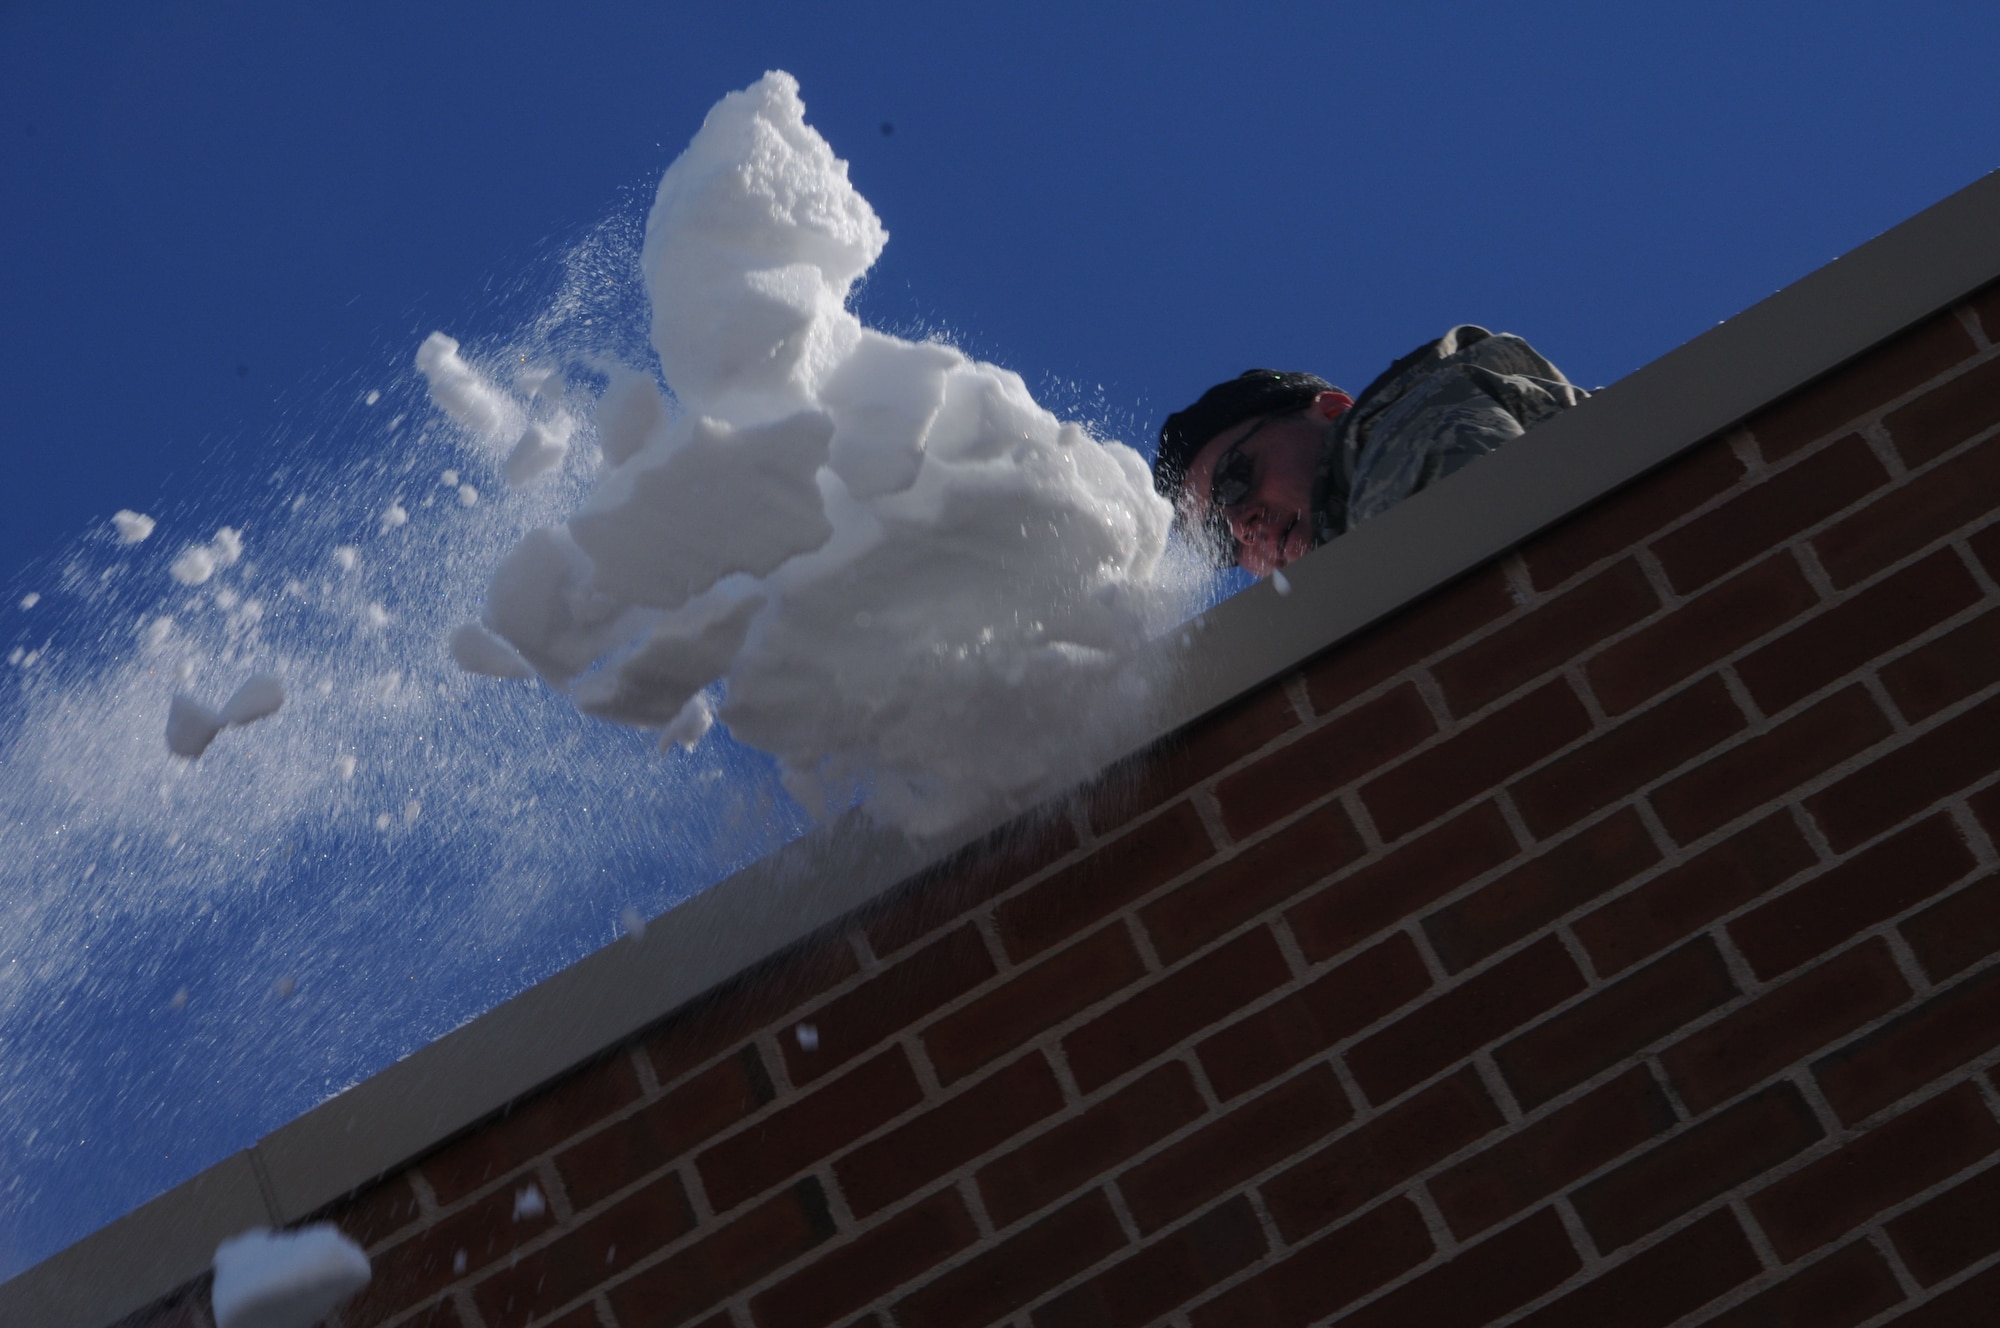 Lt. Col. Kevin McManaman, commander, 118th Airlift Squadron, throws a shovelful of snow from the roof of Tolland High School Jan. 4, 2011, after the town's schools were closed over safety concerns and town officials requested help from the Connecticut National Guard. Approximately 125 Guardsmen were activated and worked from sunrise to sunset there and at the town’s middle school. Heavy snow this winter has recently caused several roof collapses across the state. (U.S. Air Force photo by Tech. Sgt. Tedd Andrews) 